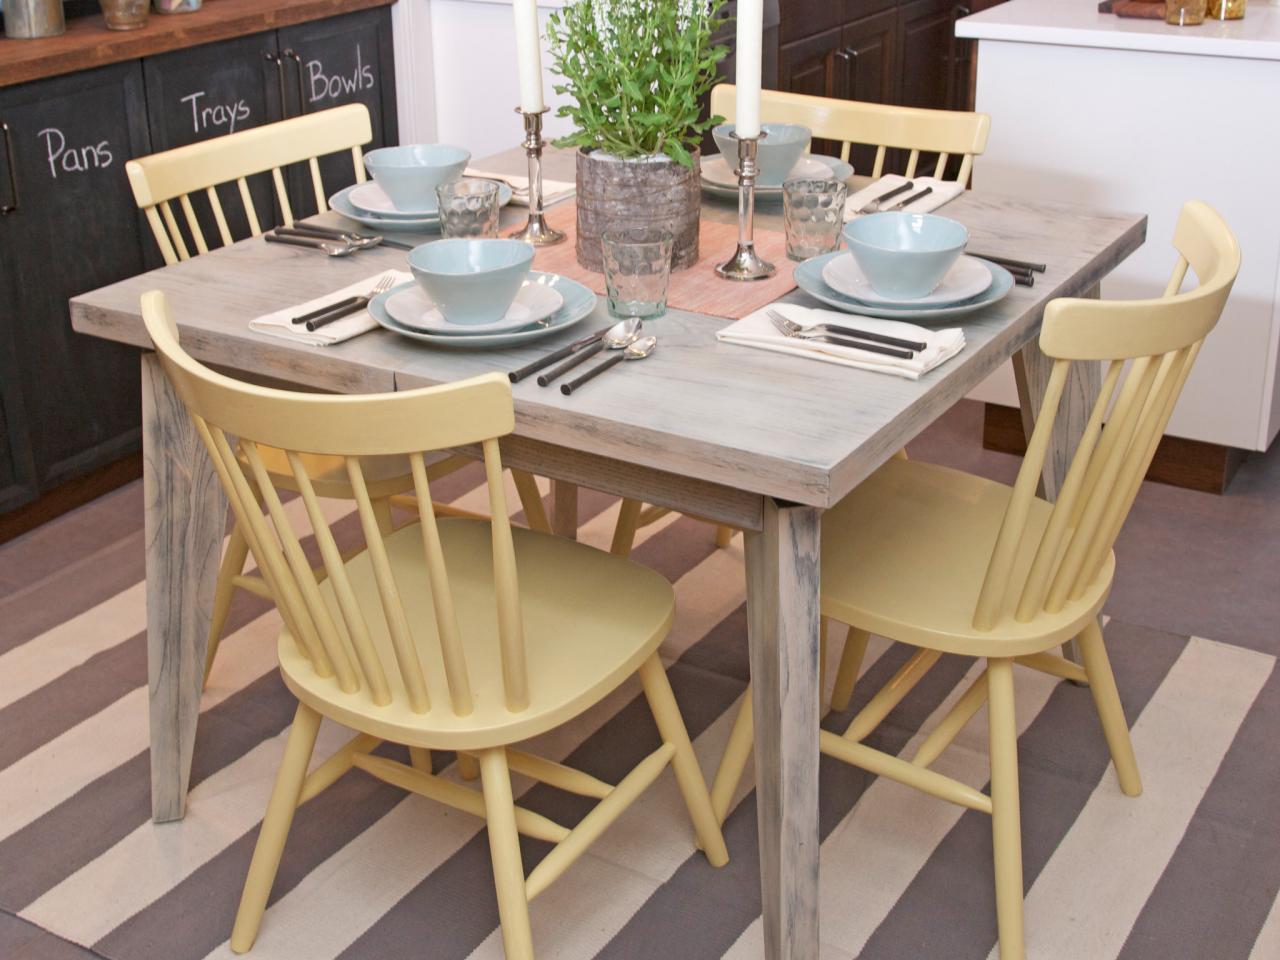 Painting Kitchen Tables Pictures, Can You Spray Paint Kitchen Table And Chairs